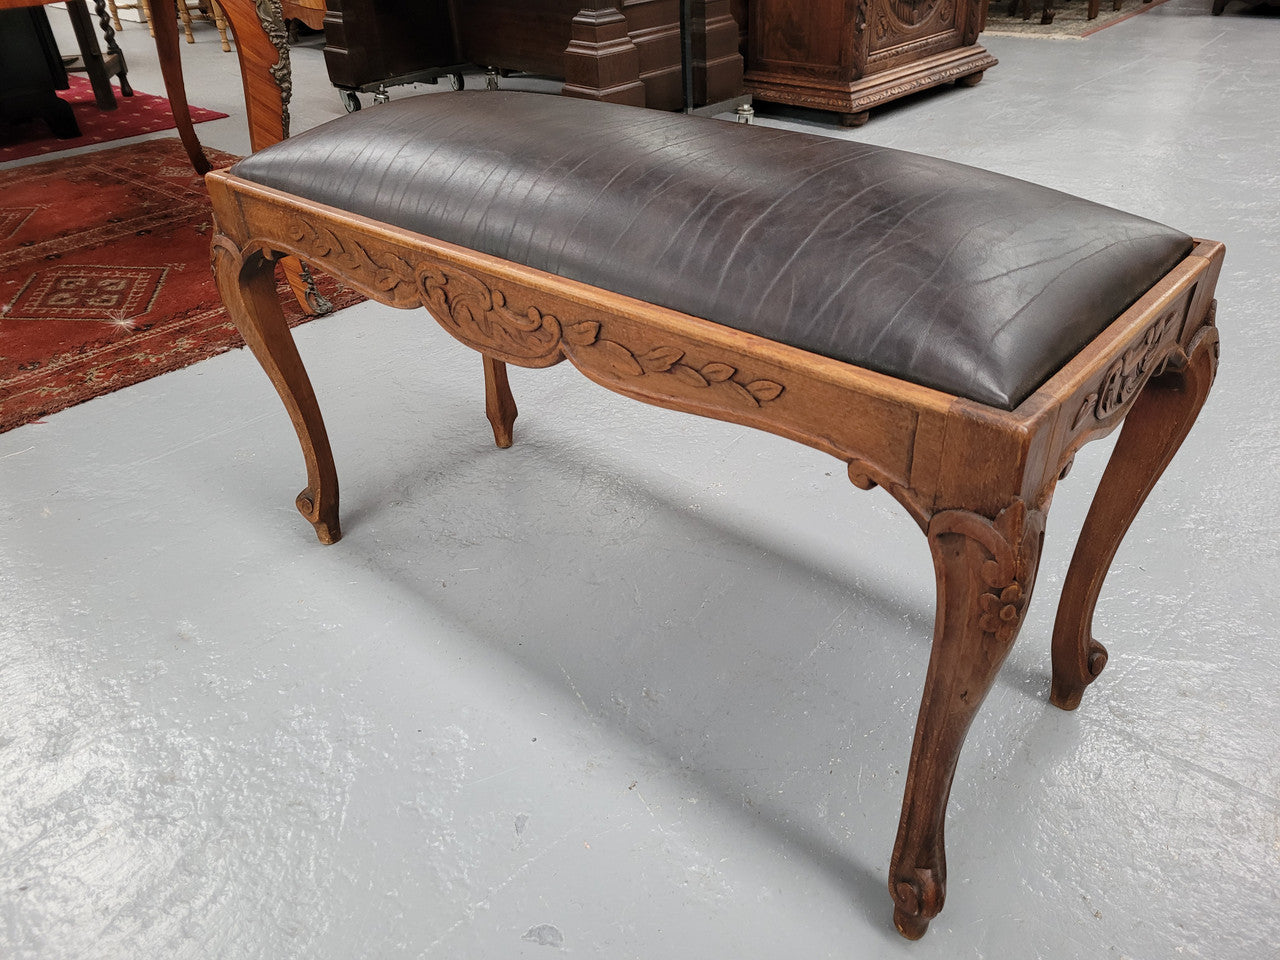 French Oak newly upholstered leather look duet stool. In good original detailed condition and new upholstery.